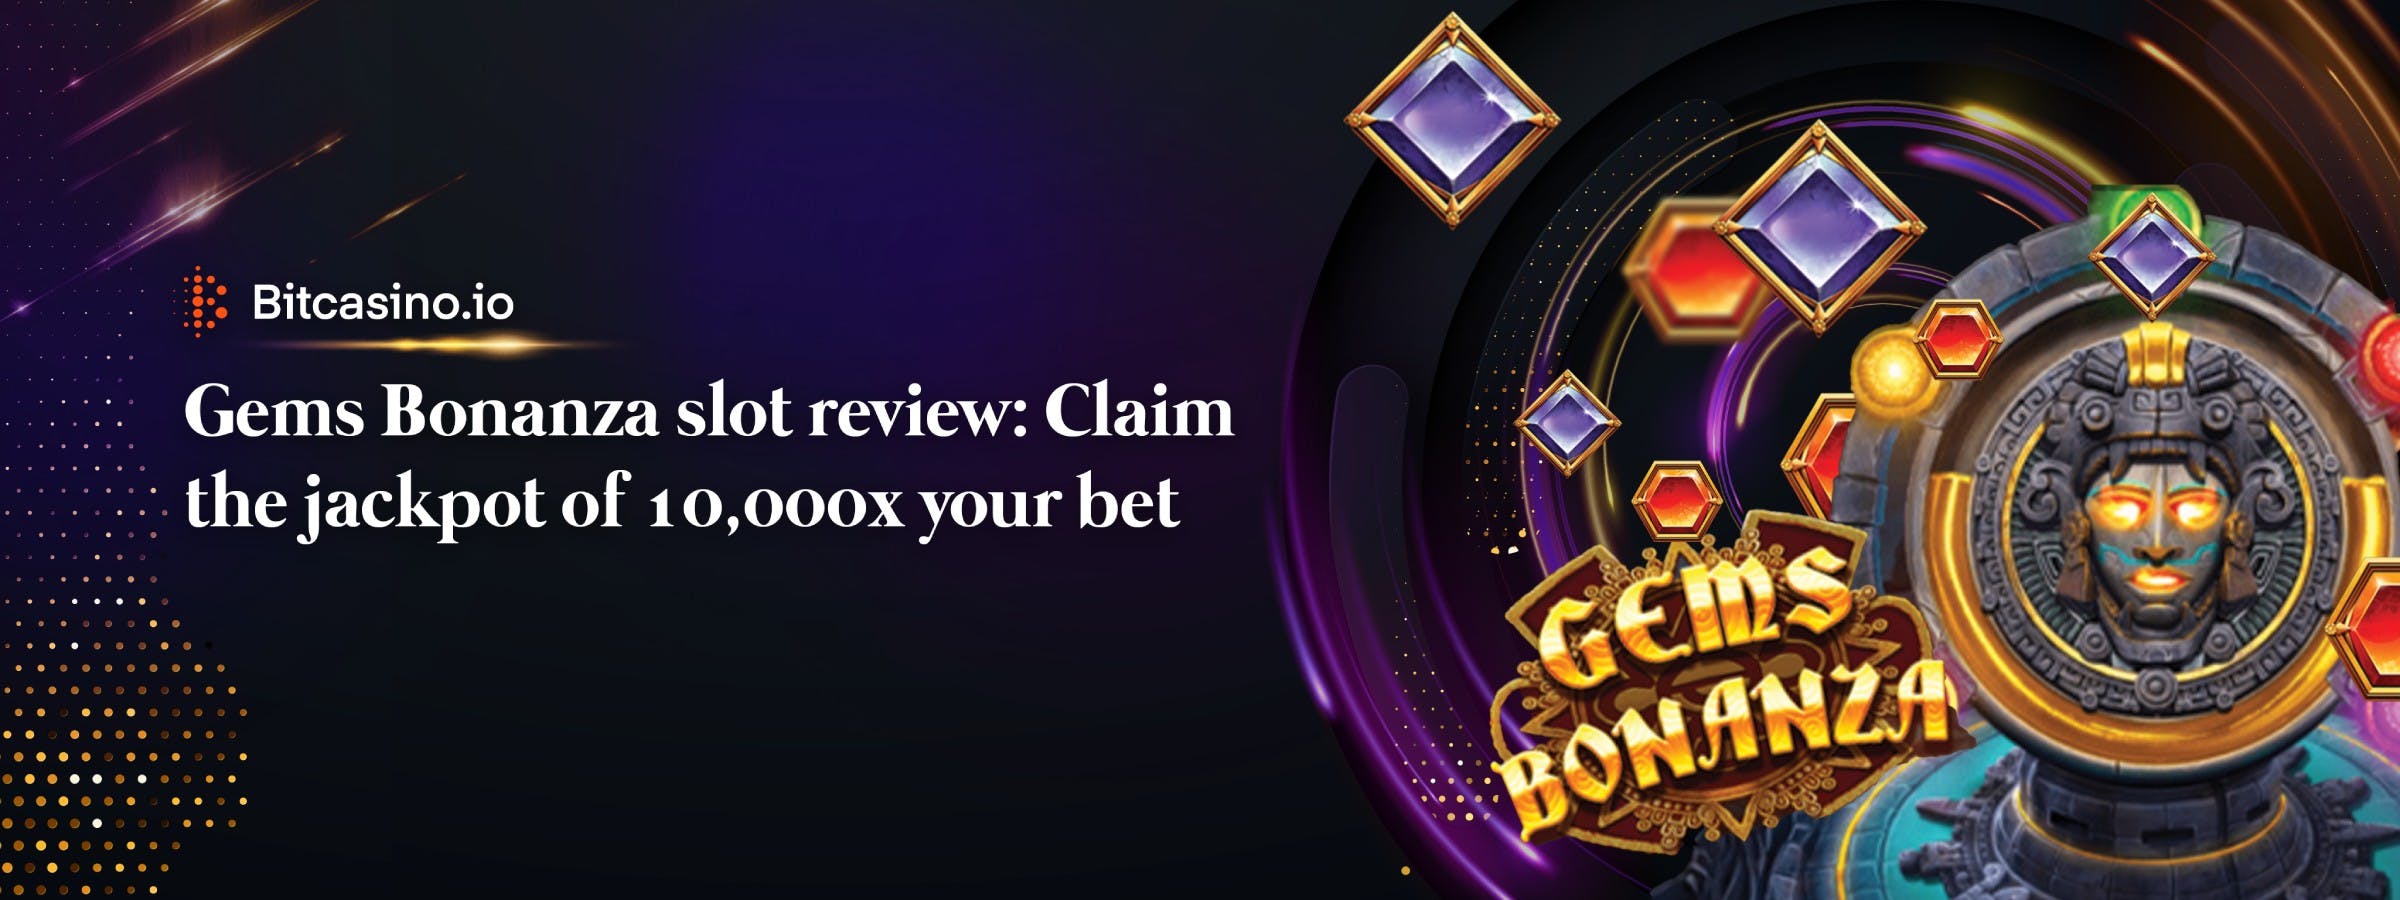 Gems Bonanza slot review: Claim the jackpot of 10,000x your bet 